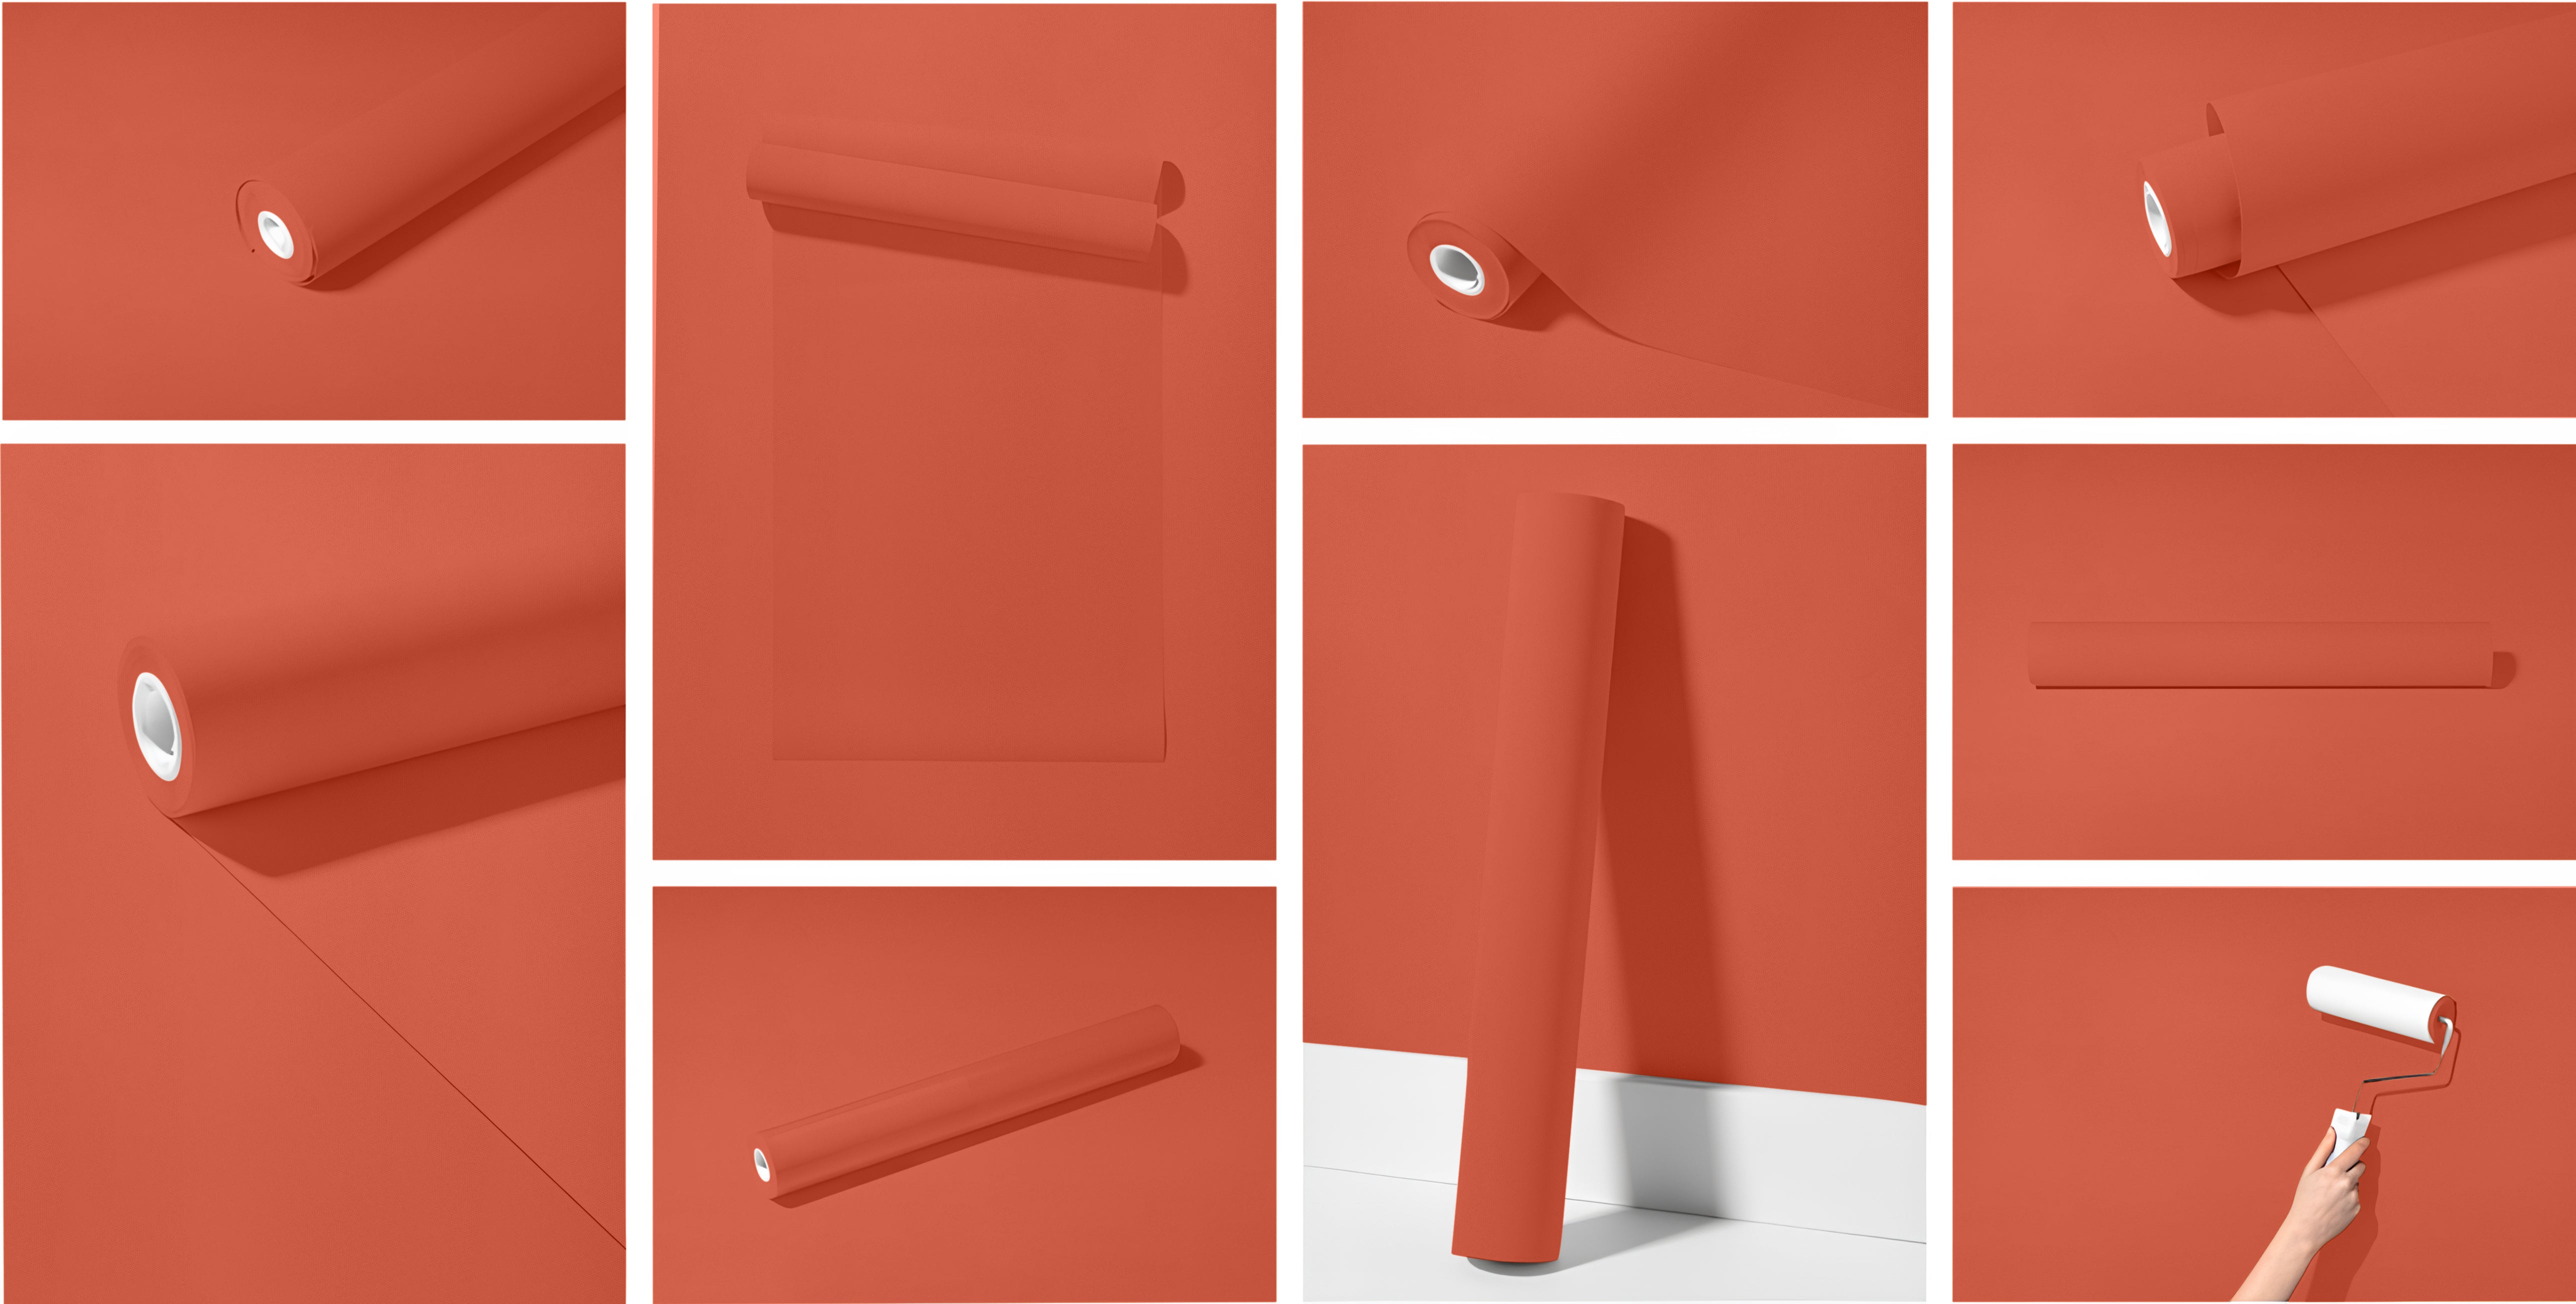 Peel & Stick Removable Re-usable Paint - Color RAL 2012 Salmon Orange - offRAL™ - RALRAW LLC, USA